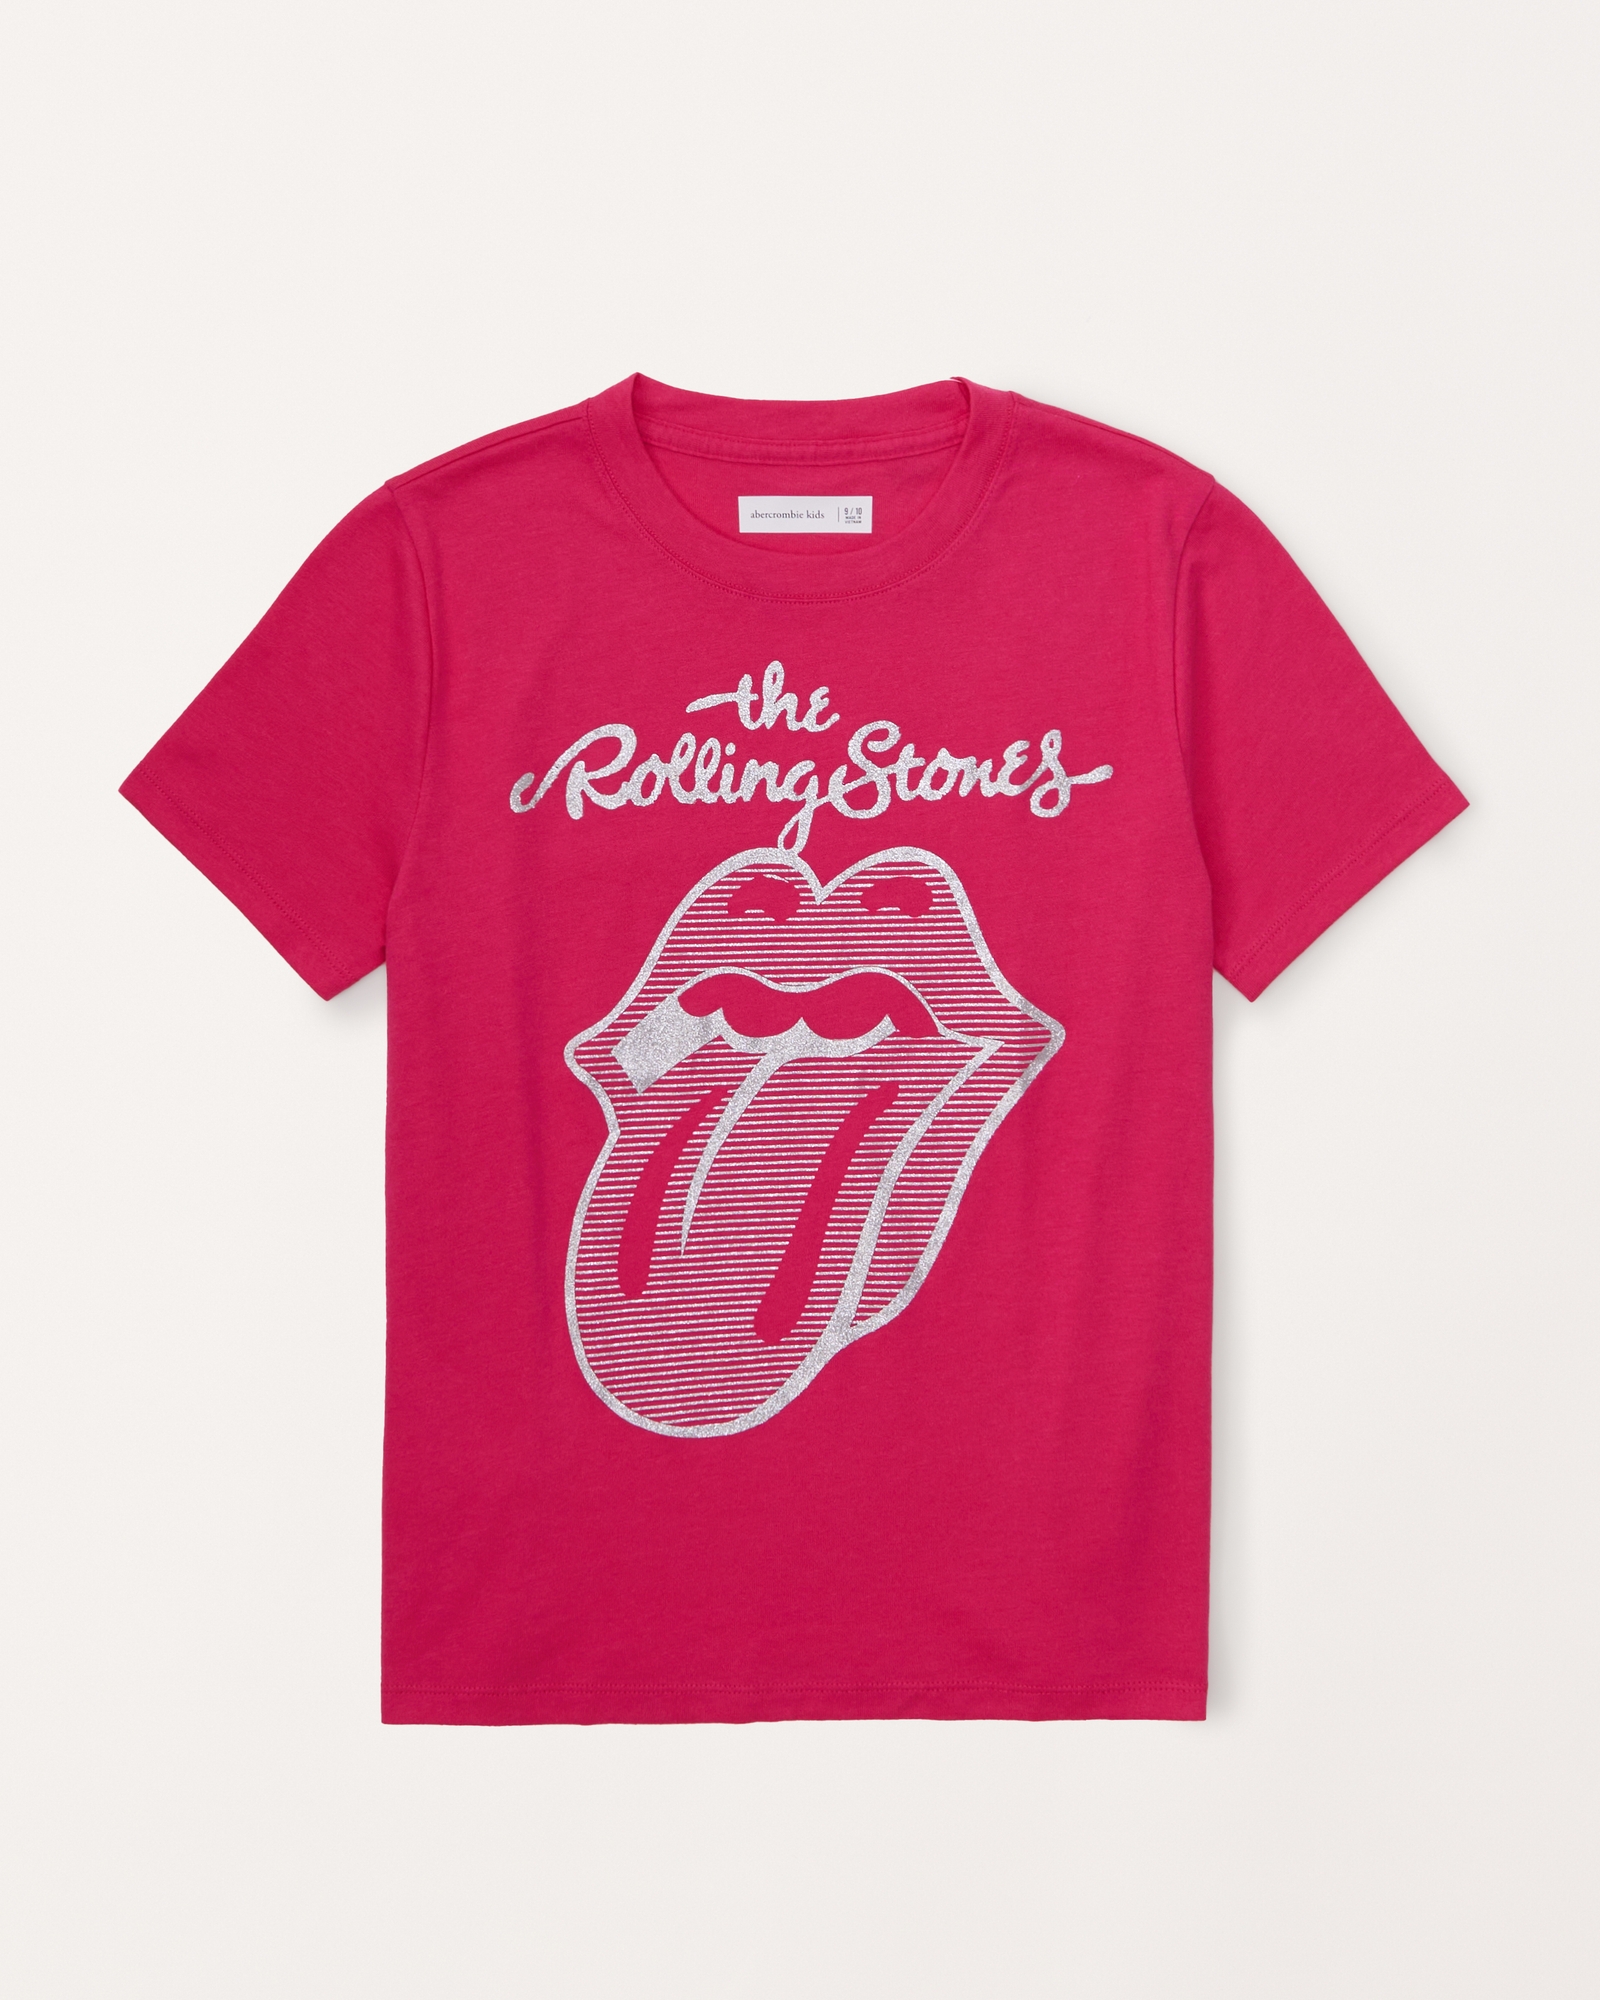 Hollister Co. Red Tops & T-Shirts for Girls Sizes (4+)